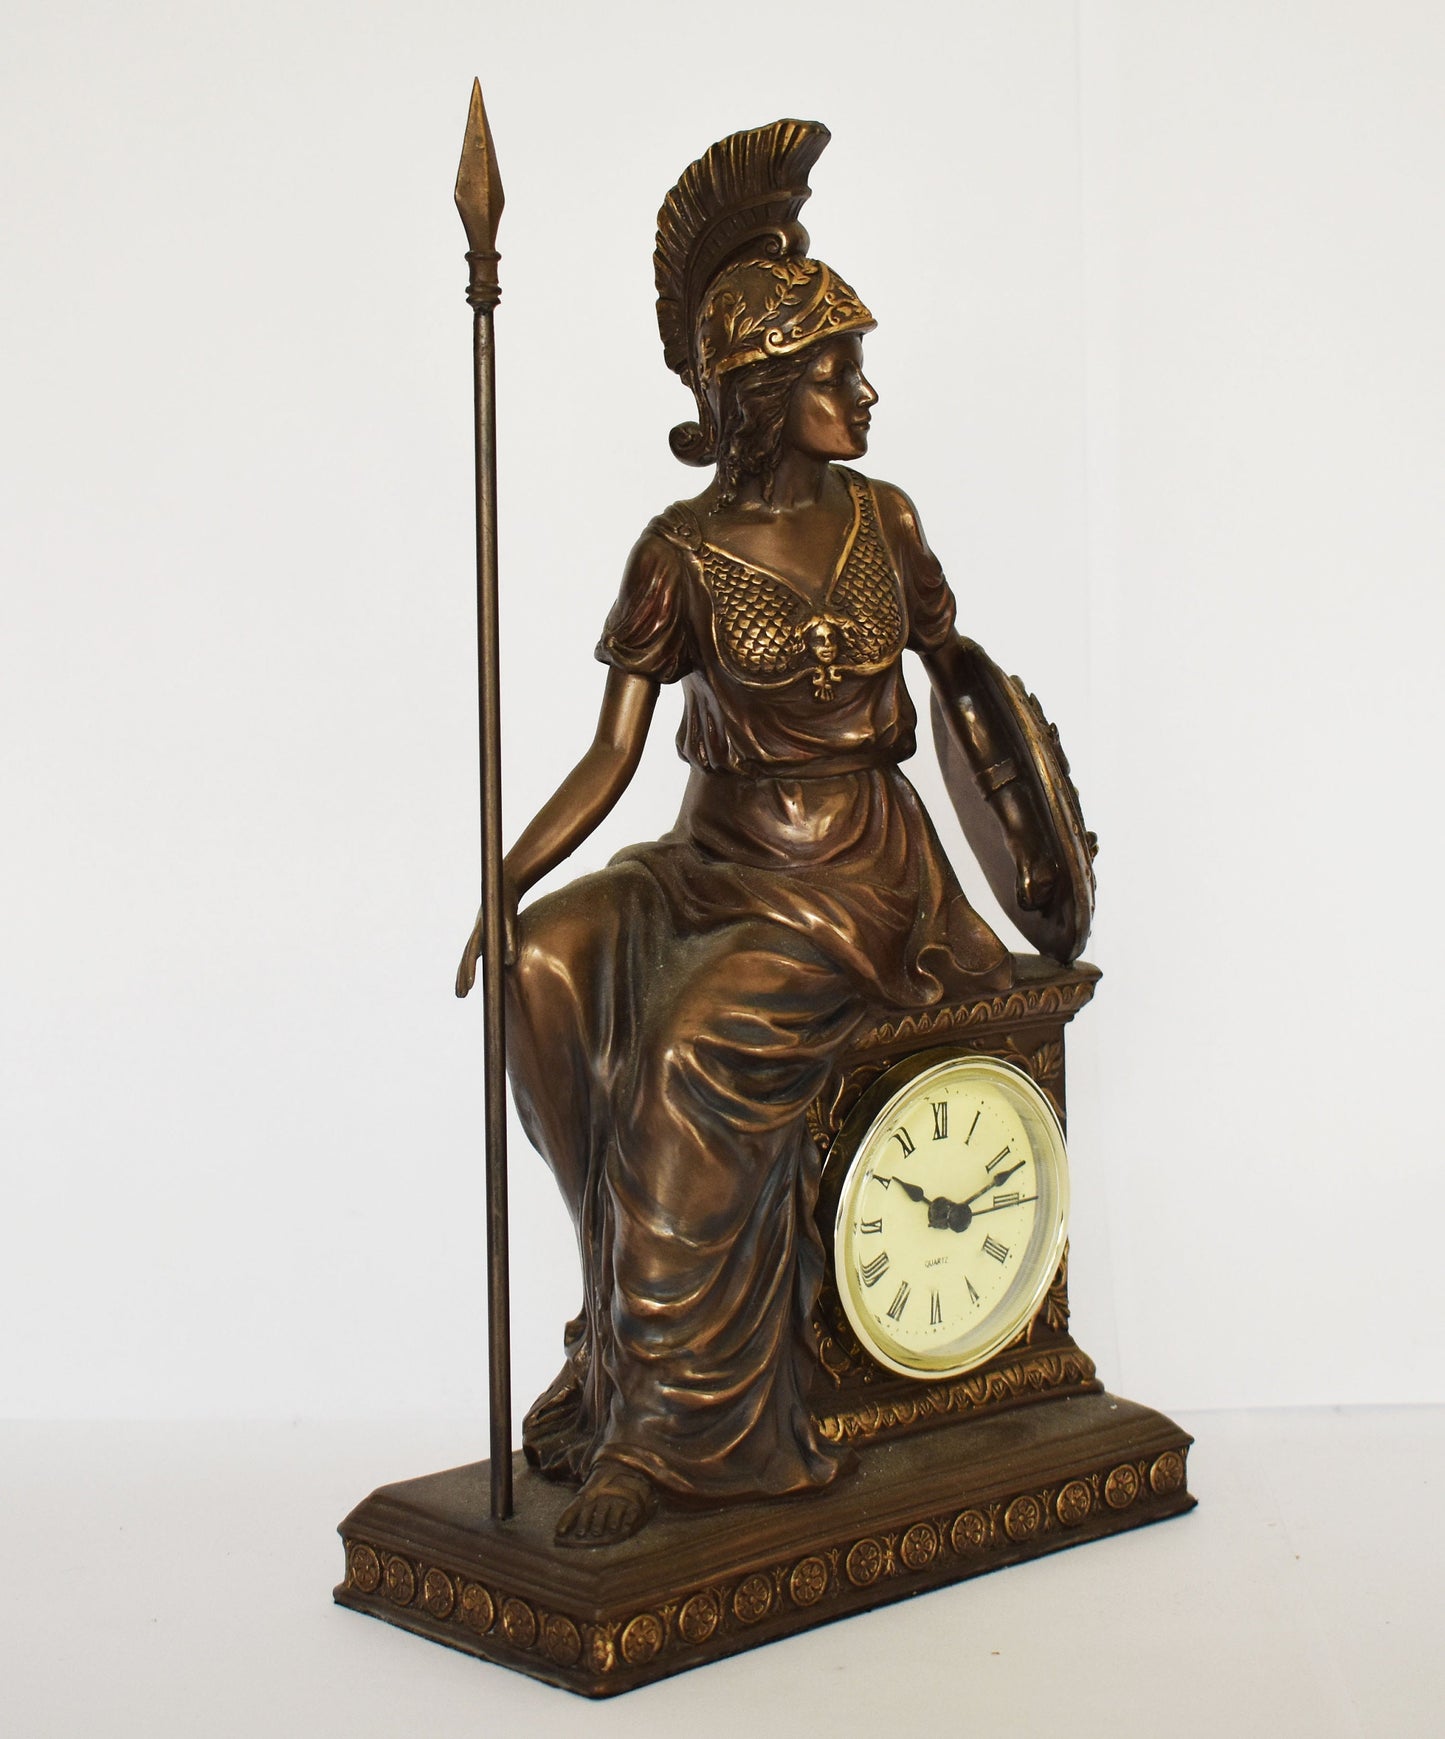 Athena Minerva with Clock - Greek Roman goddes of Wisdom, Strength, Strategy, Inspiration, Arts, Crafts, and Skill - Cold Cast Bronze Resin